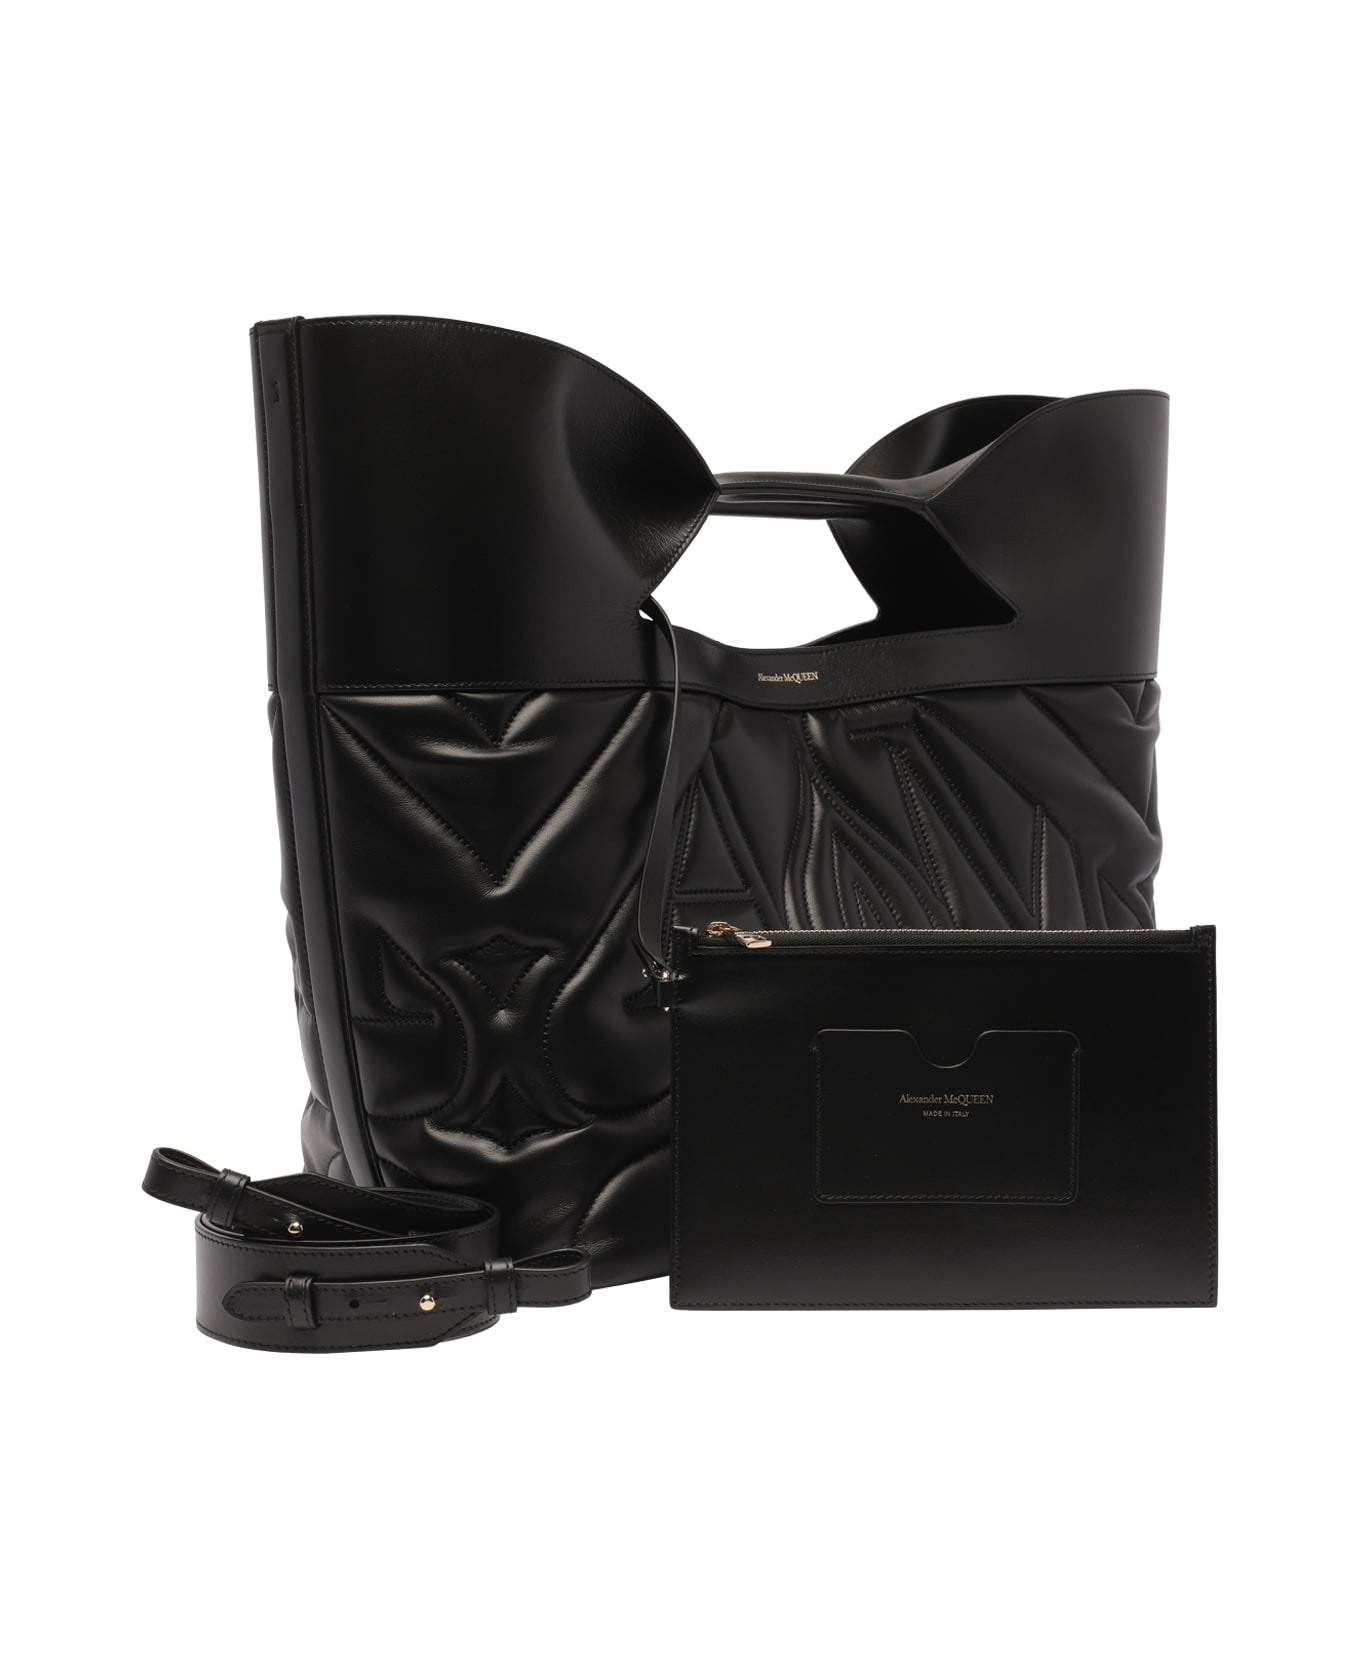 Alexander McQueen Large The Bow Bag In Quilted Black Leather - Nero トートバッグ